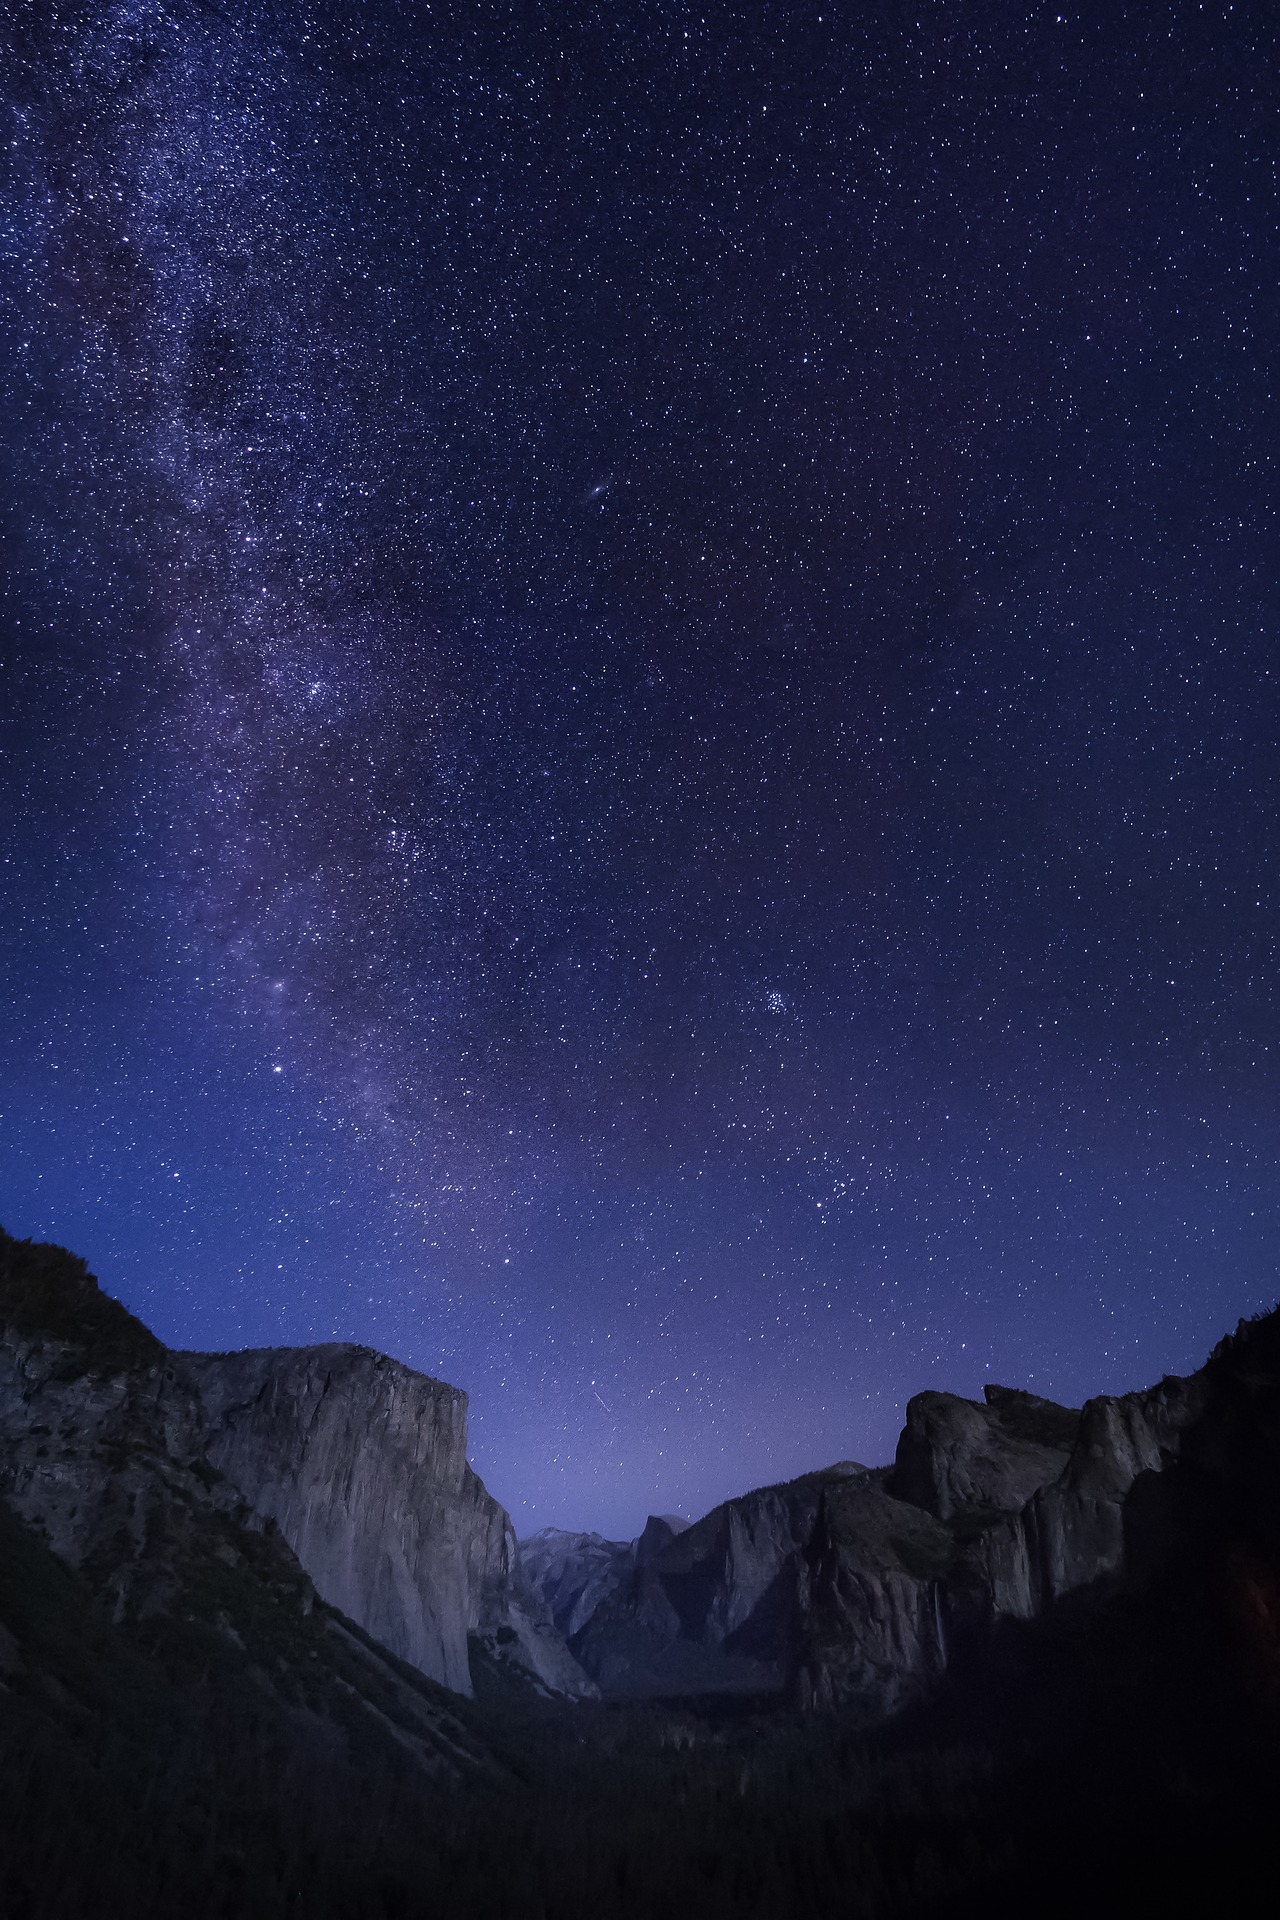 A night scene at Tunnel View, with the Milky Way and stars visible over El Capitan, Cathedral Rocks and Half Dome.